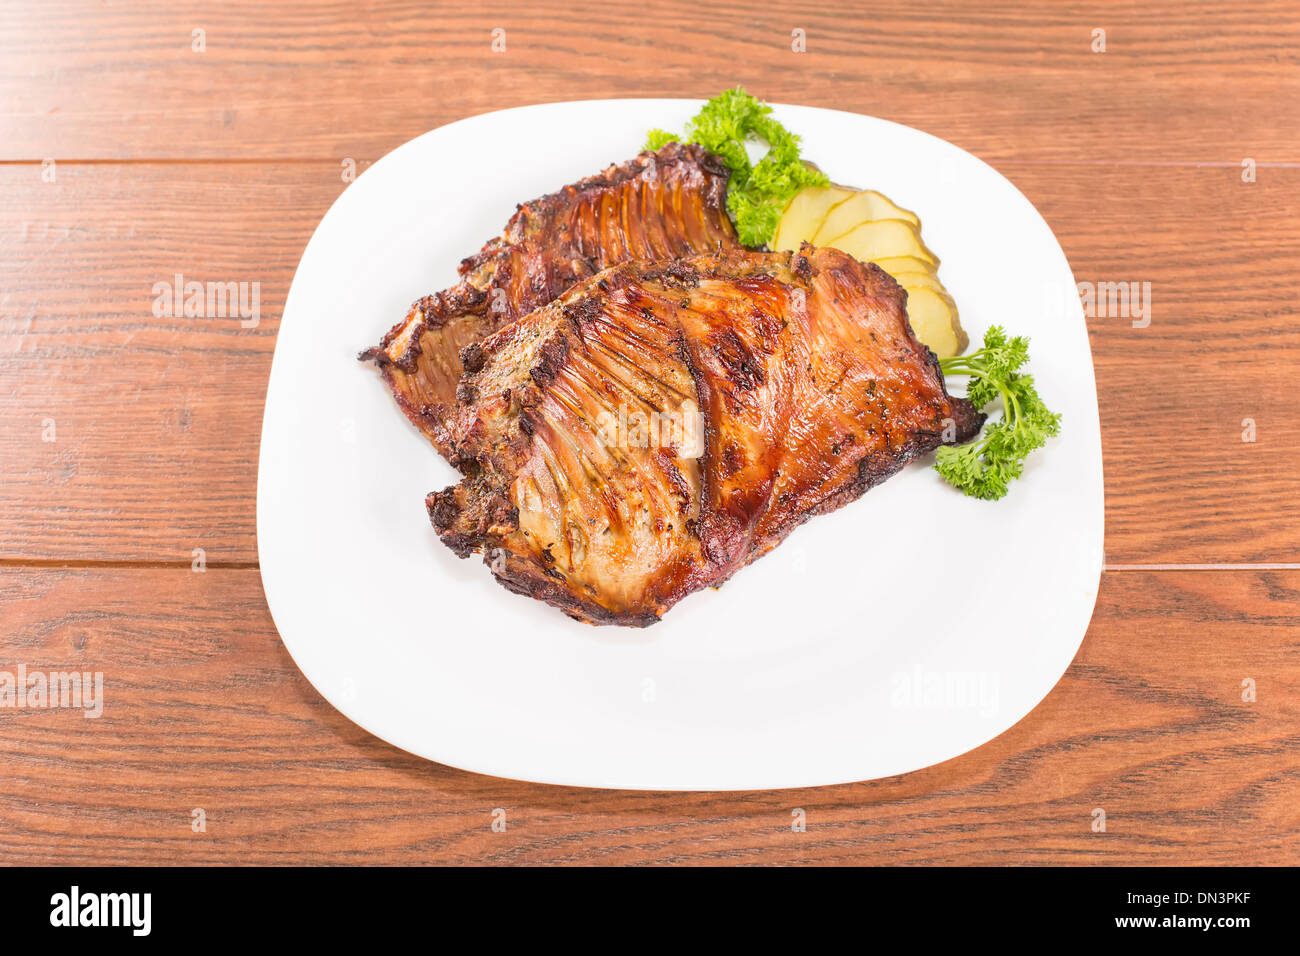 appetizing and ruddy marsh beaver ribs grilled Stock Photo